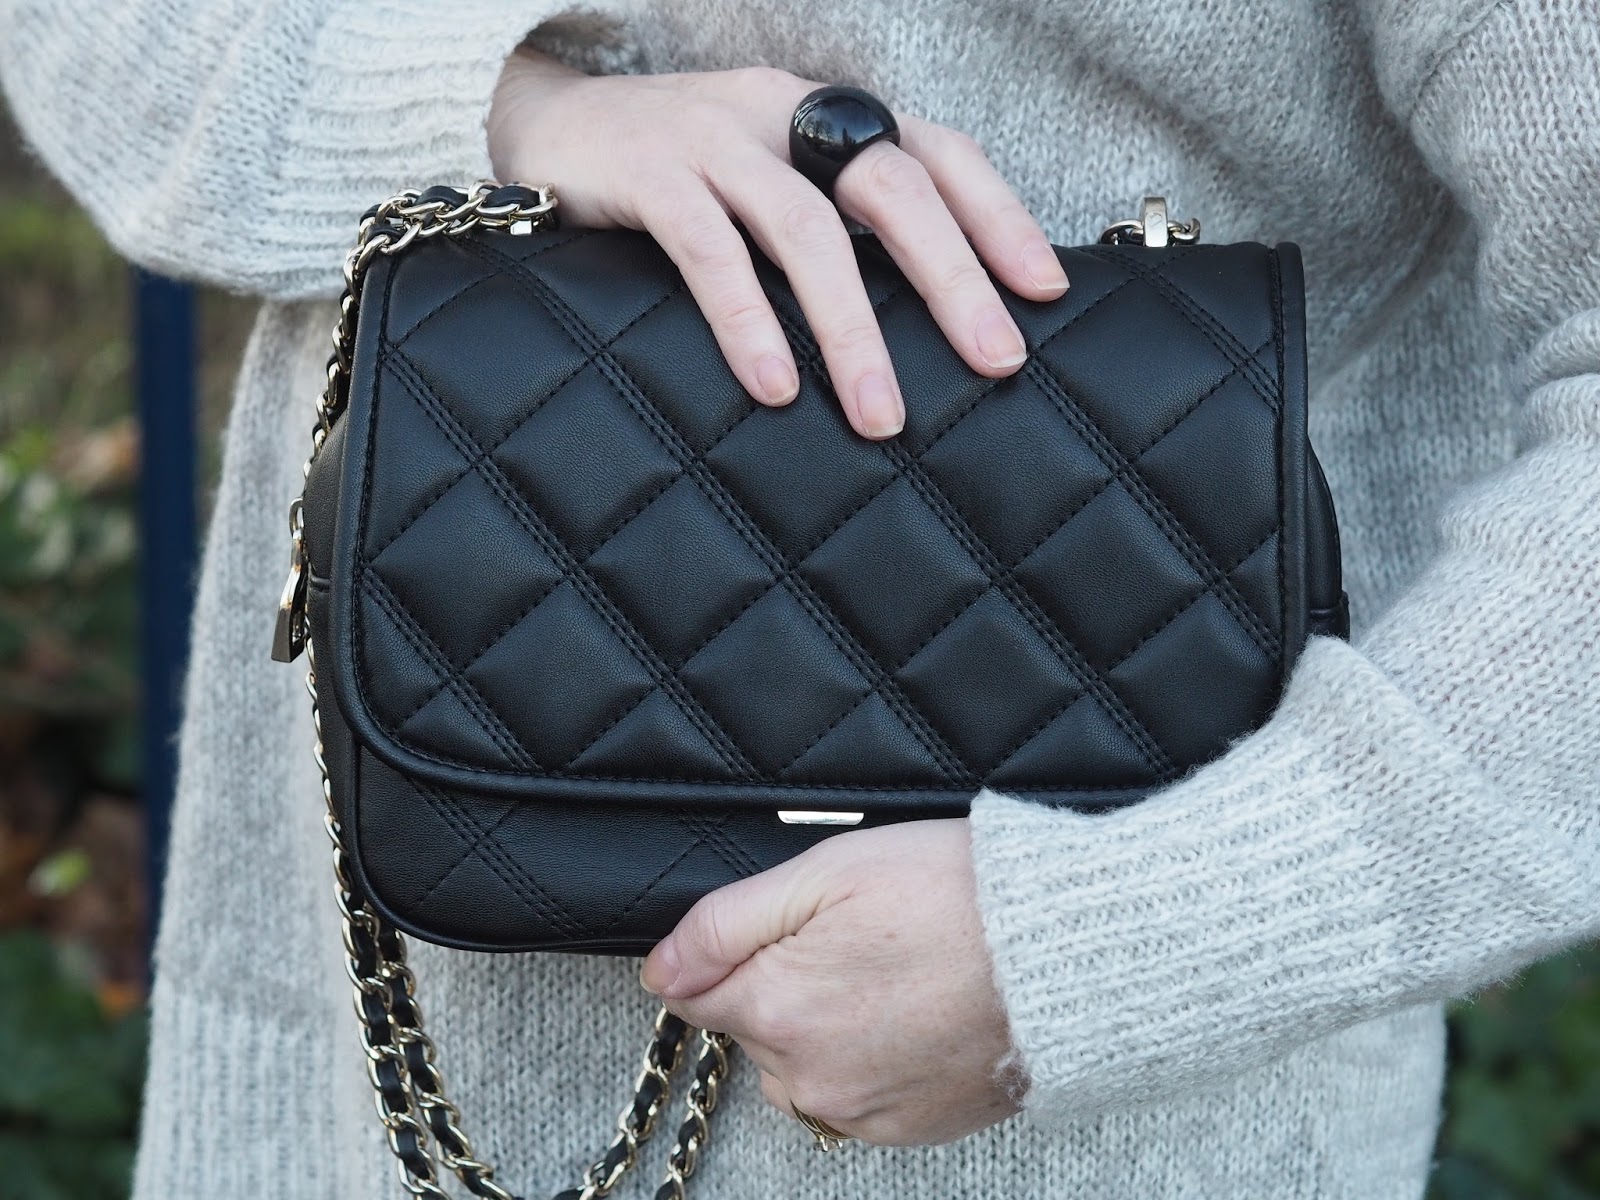 winter casuals fashion New Look Zara handbags Priceless Life of Mine Over 40 lifestyle blog